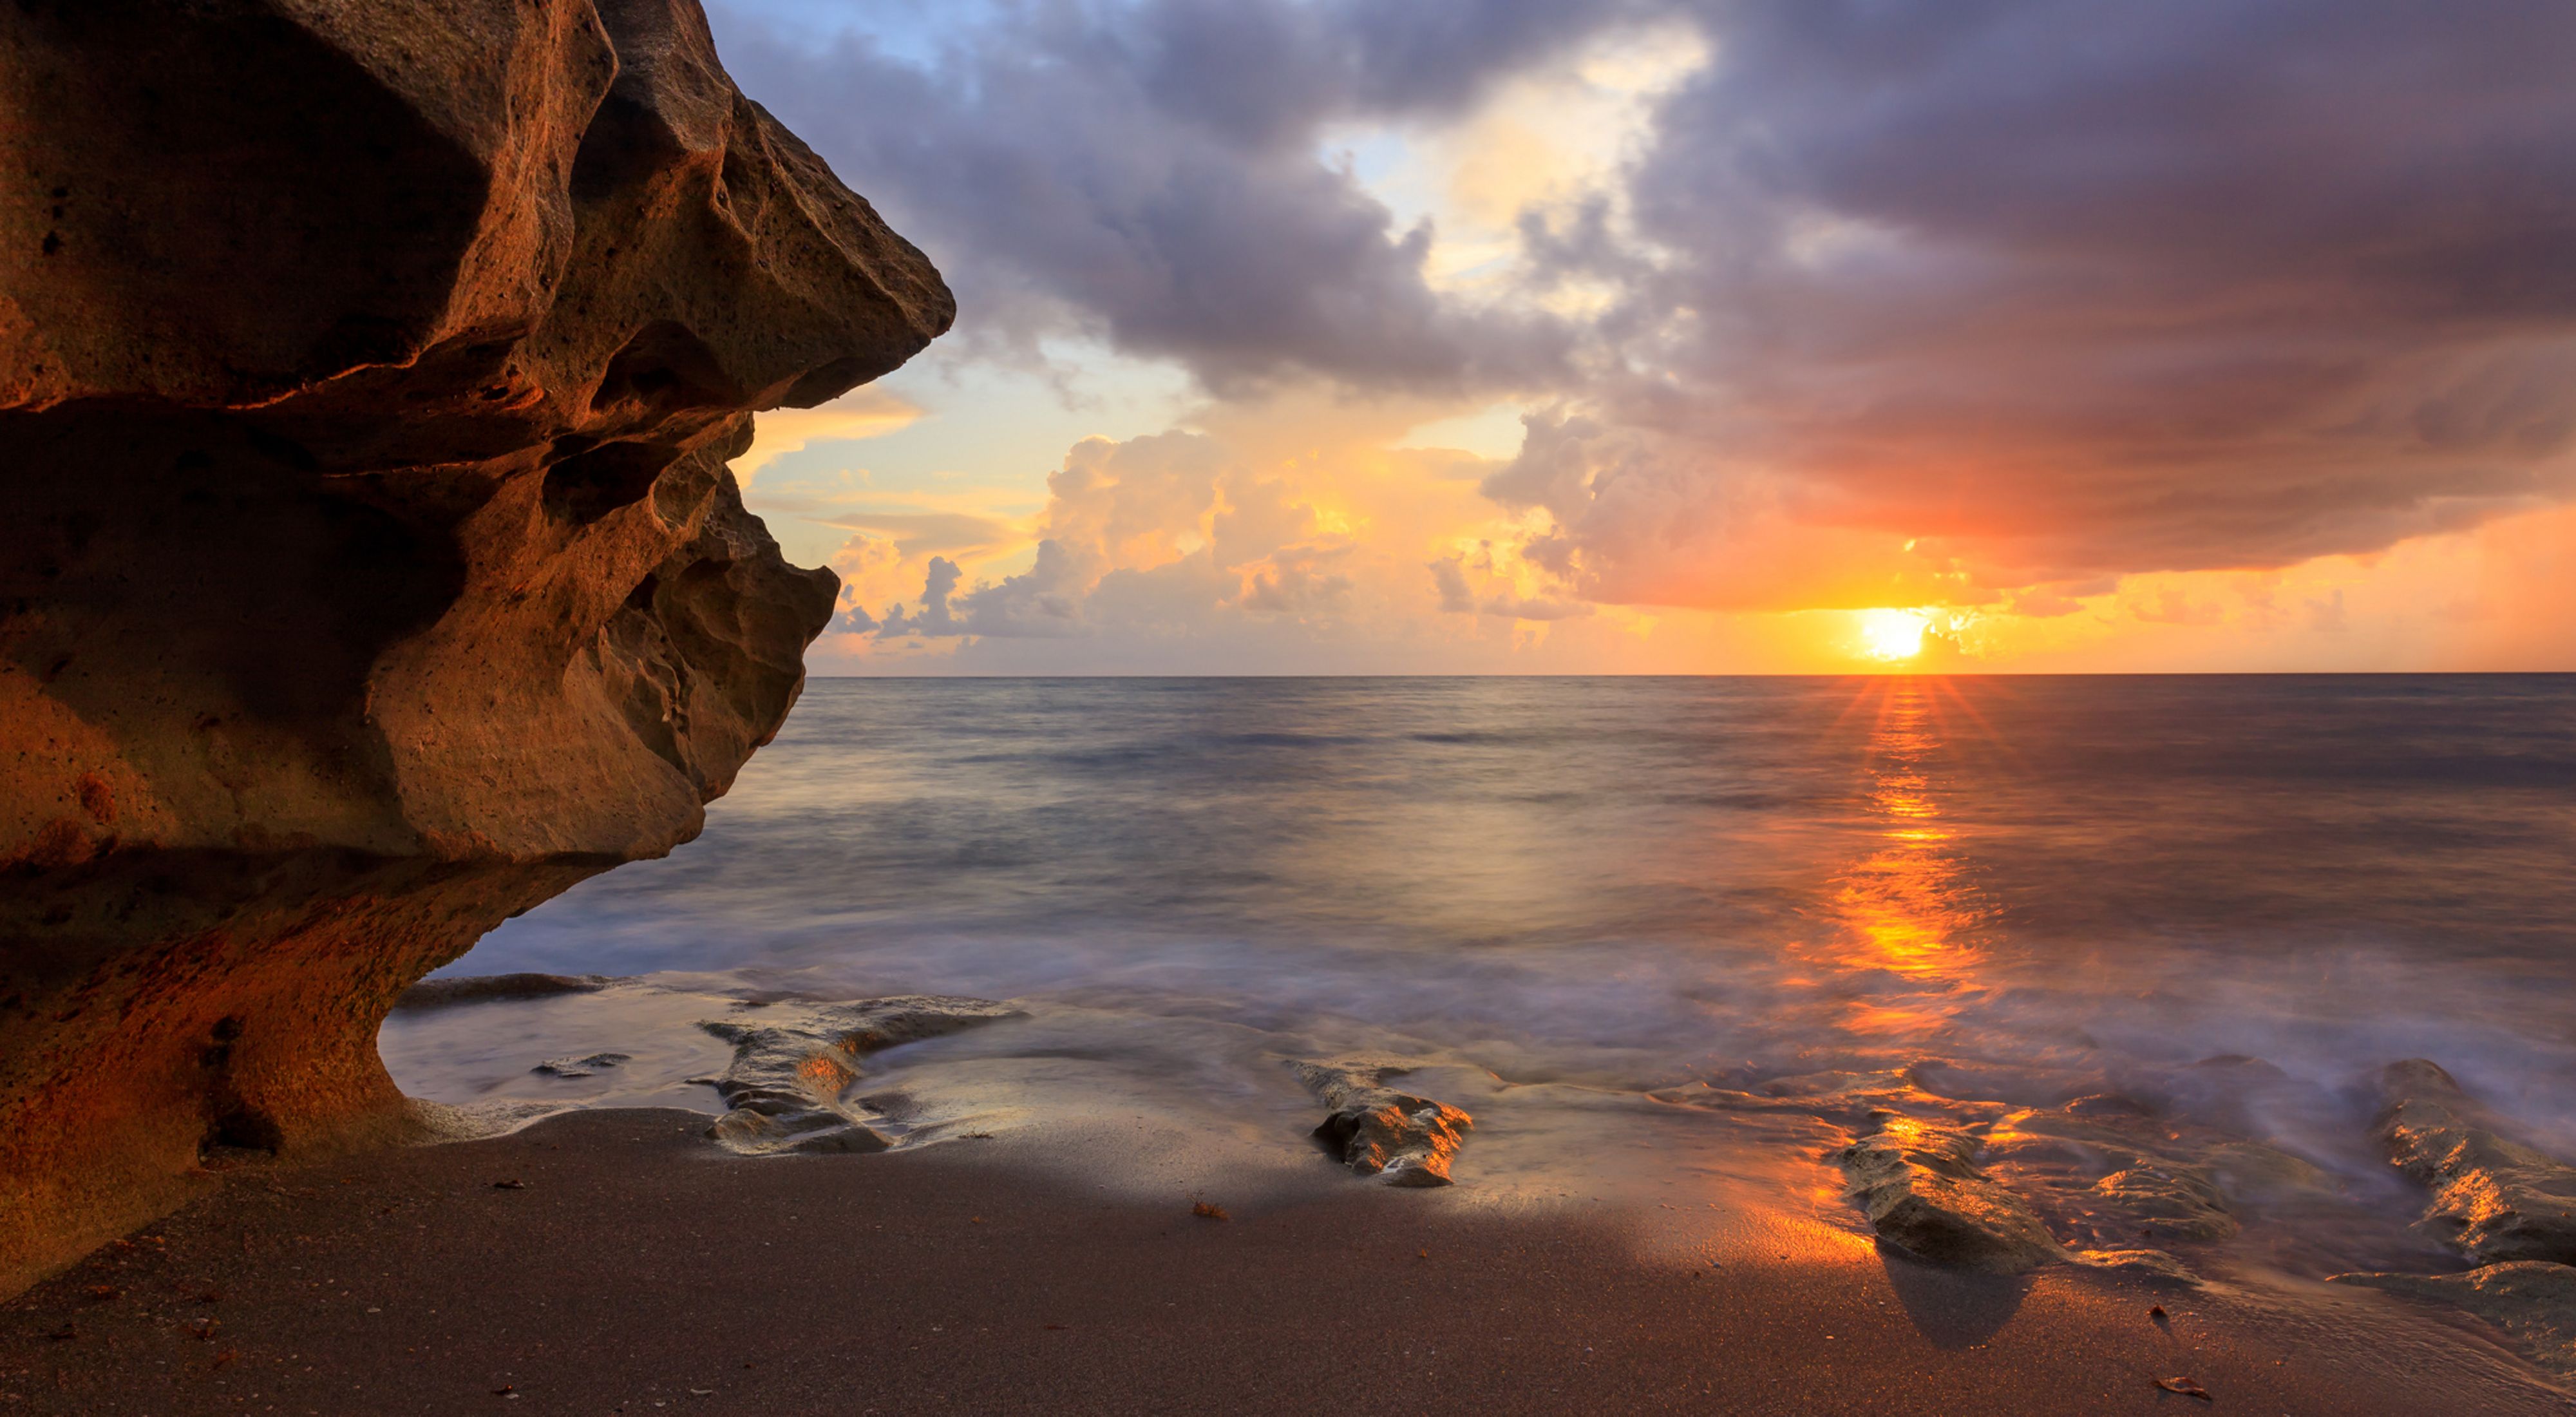 Sunrise over the ocean, with a large rock formation in the left foreground.